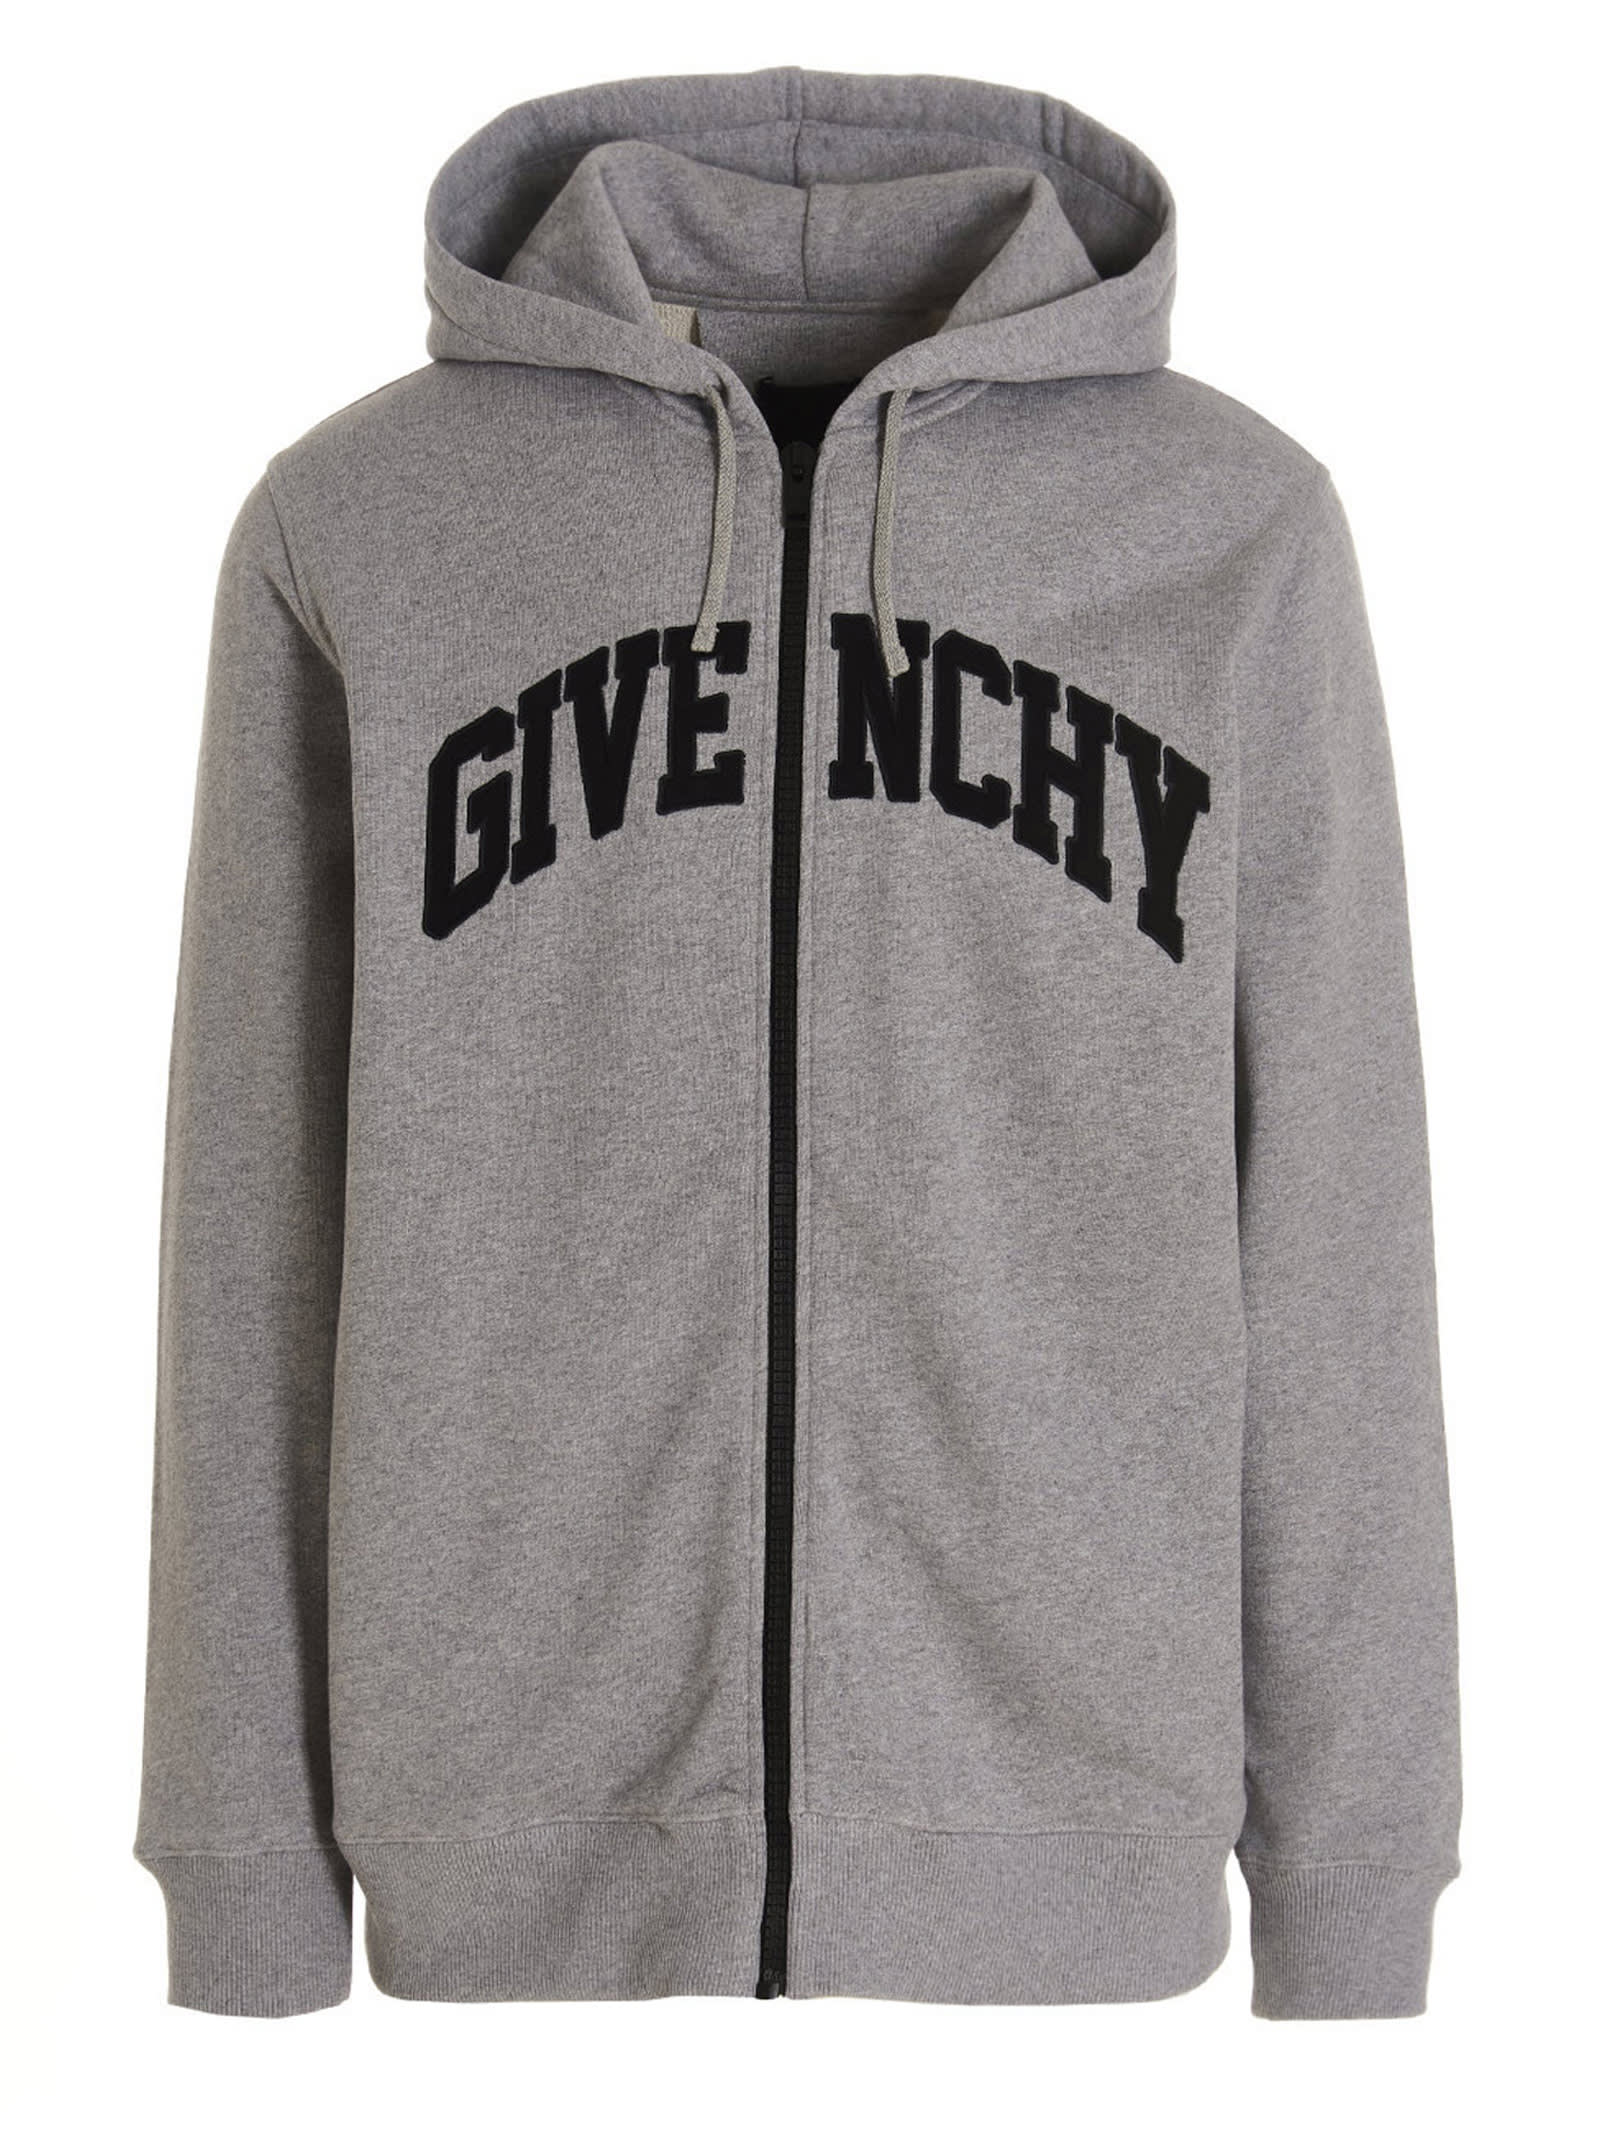 GIVENCHY LOGO EMBROIDERY HOODIE